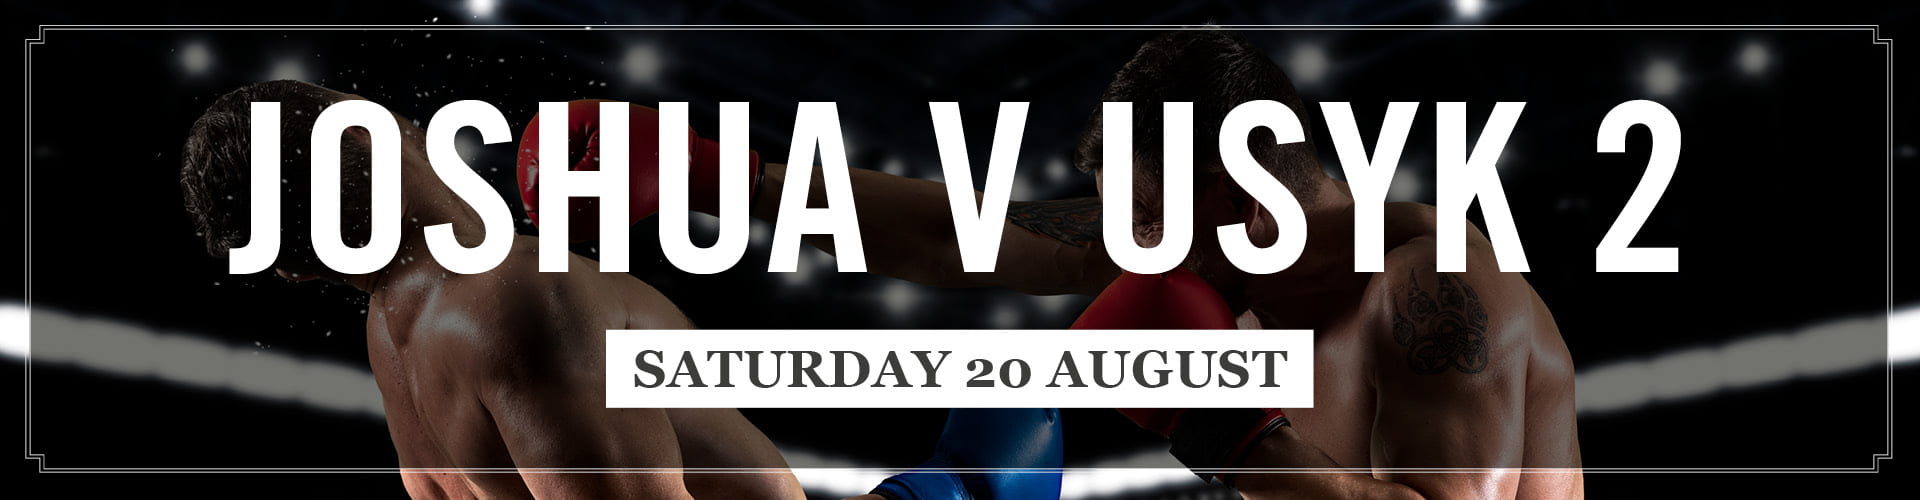 Pubs near me showing Boxing live